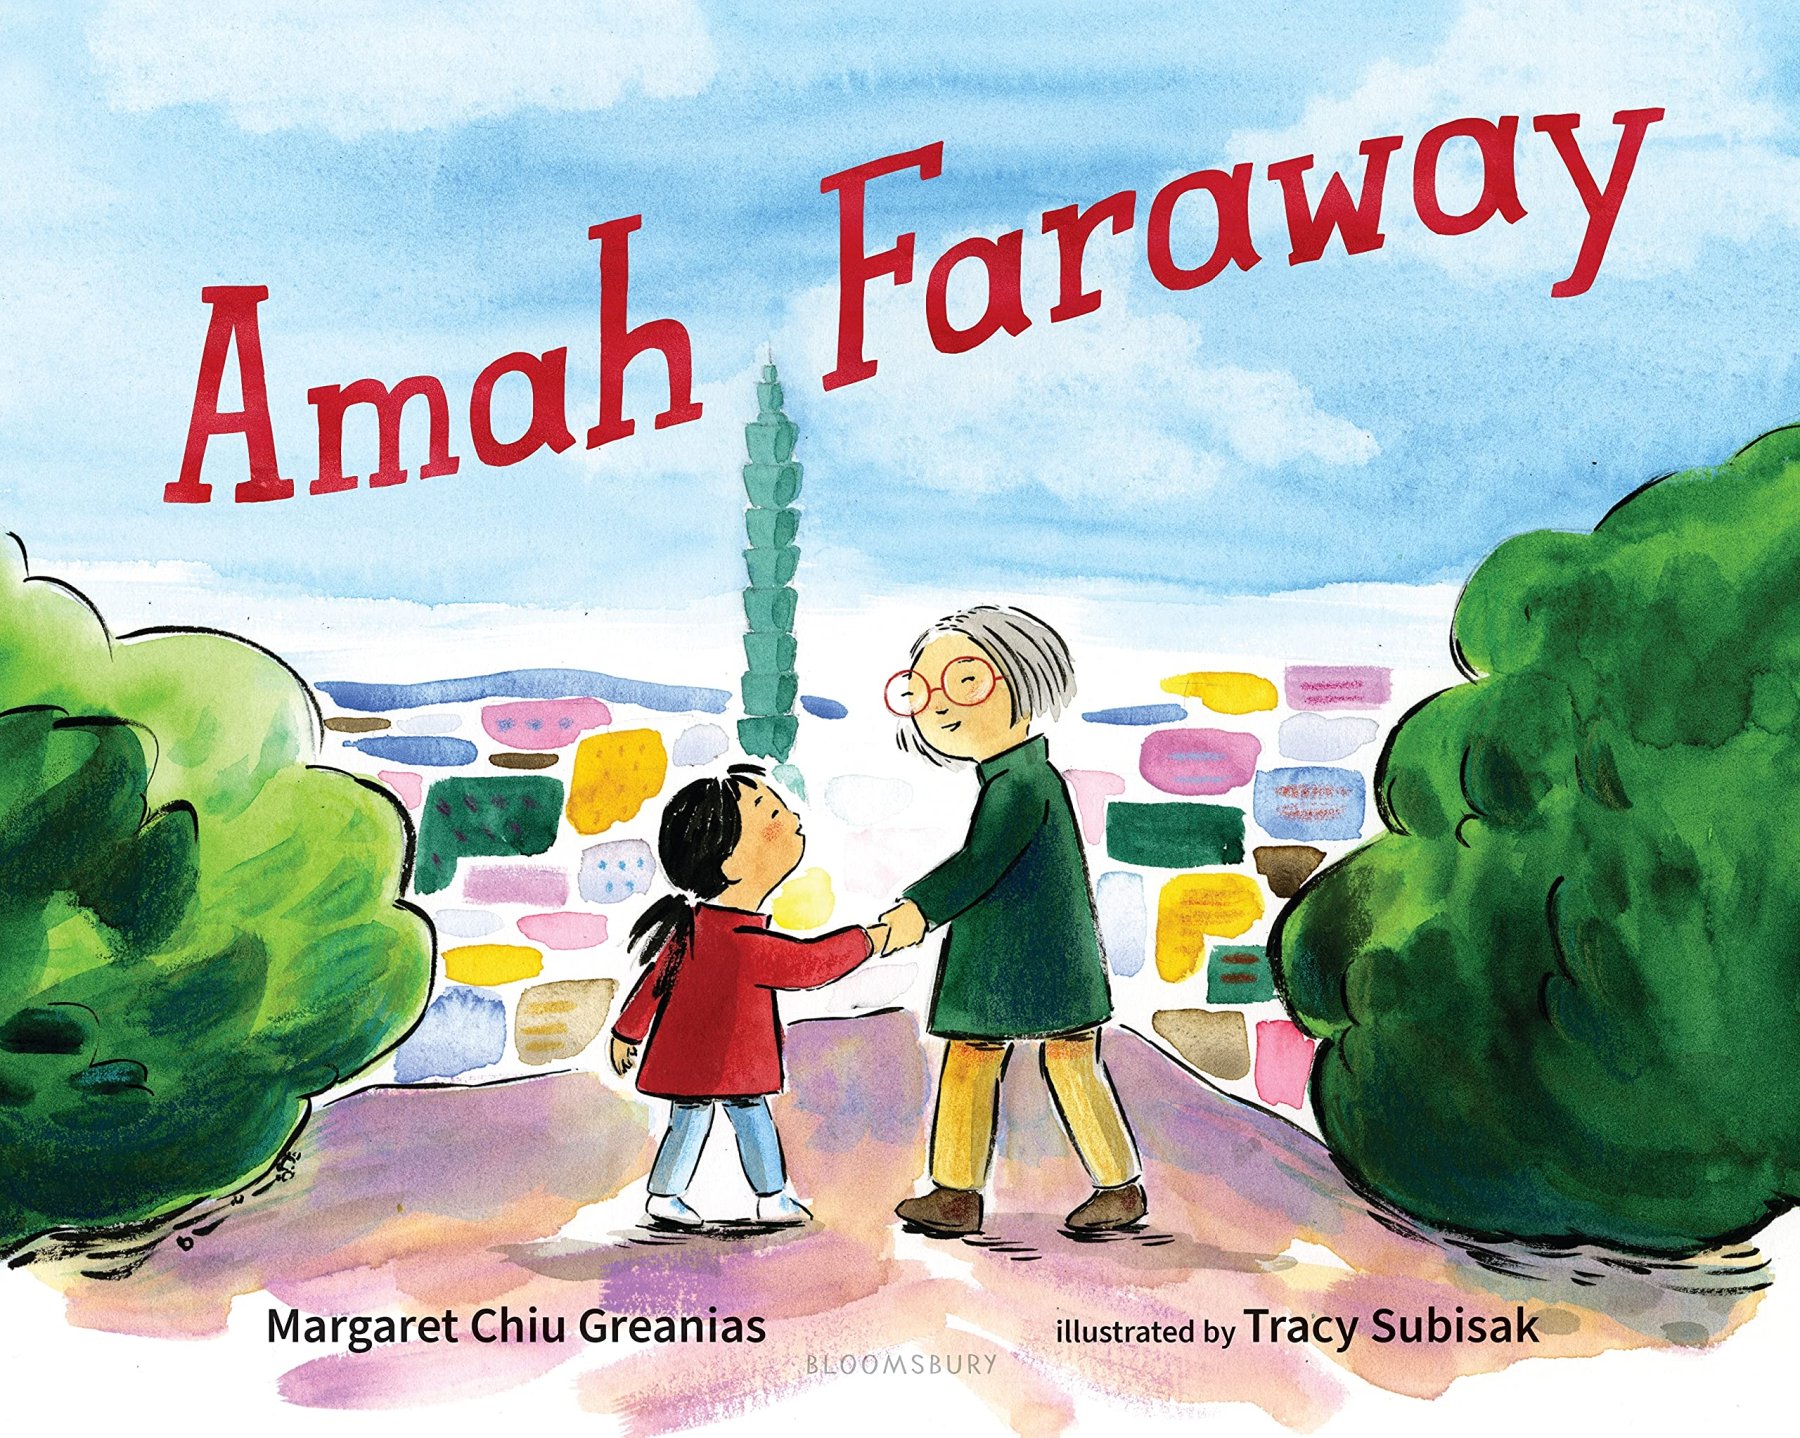 The cover of the book Amah Faraway, featuring a watercolor of the Taipei skyline